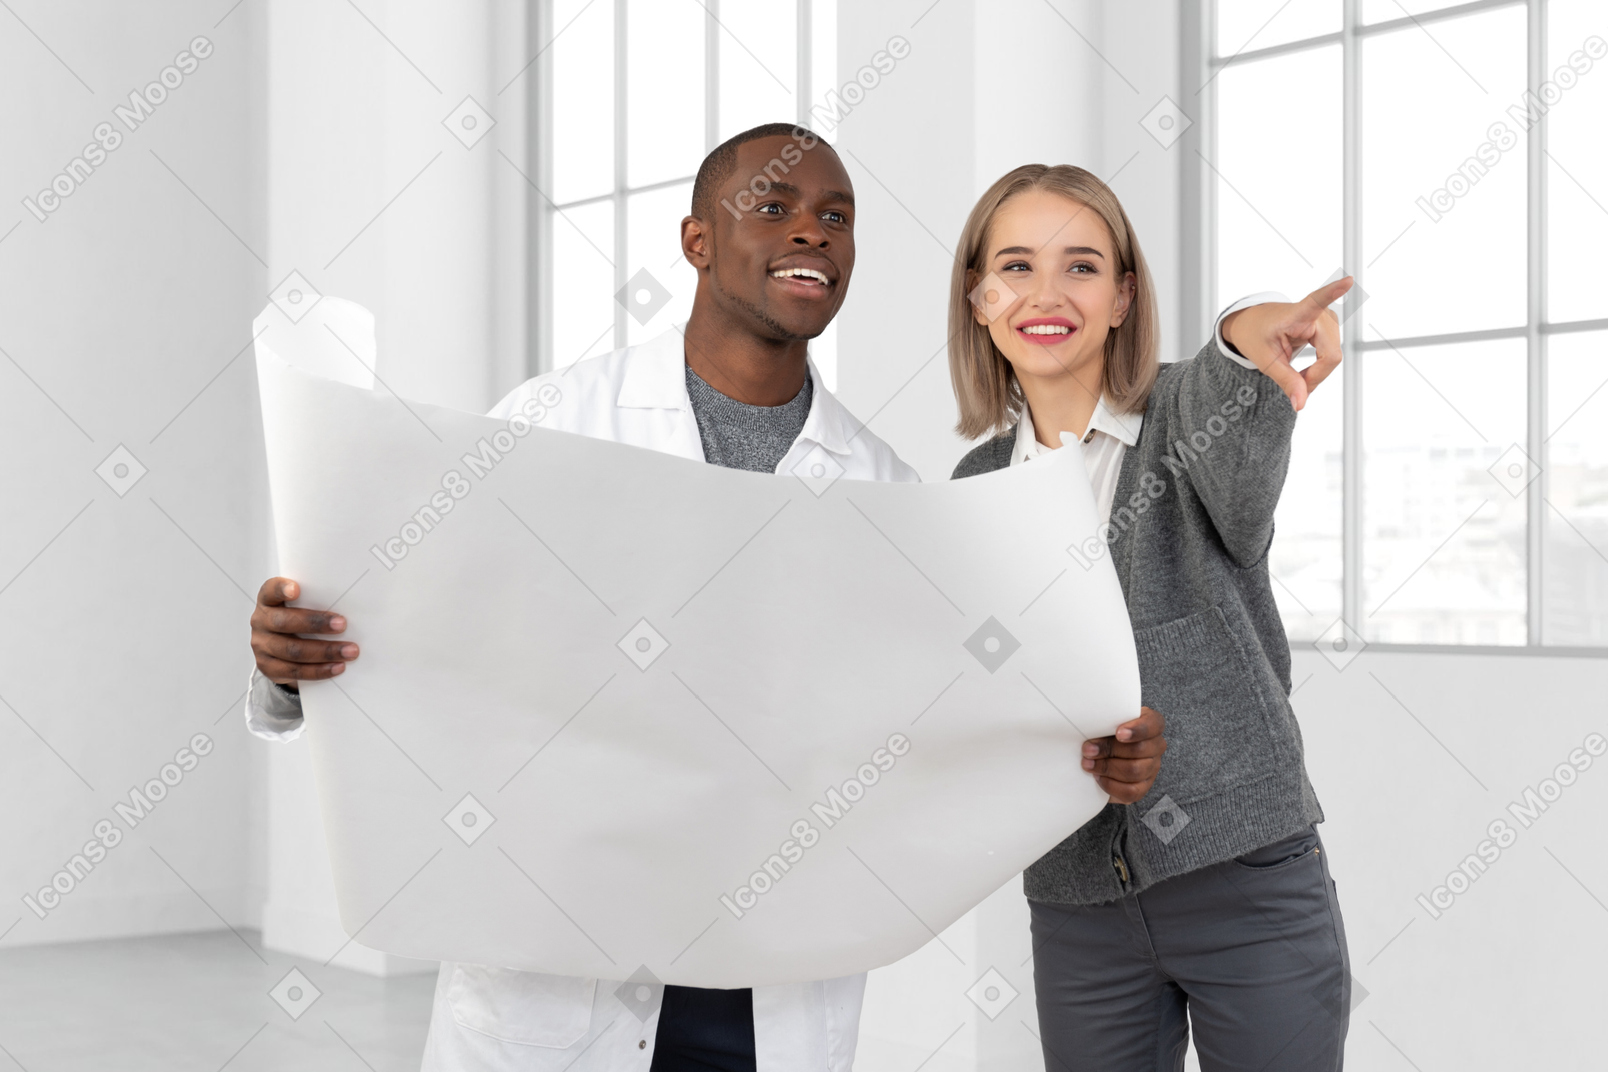 Man and woman holding a large sheet of paper and pointing at something